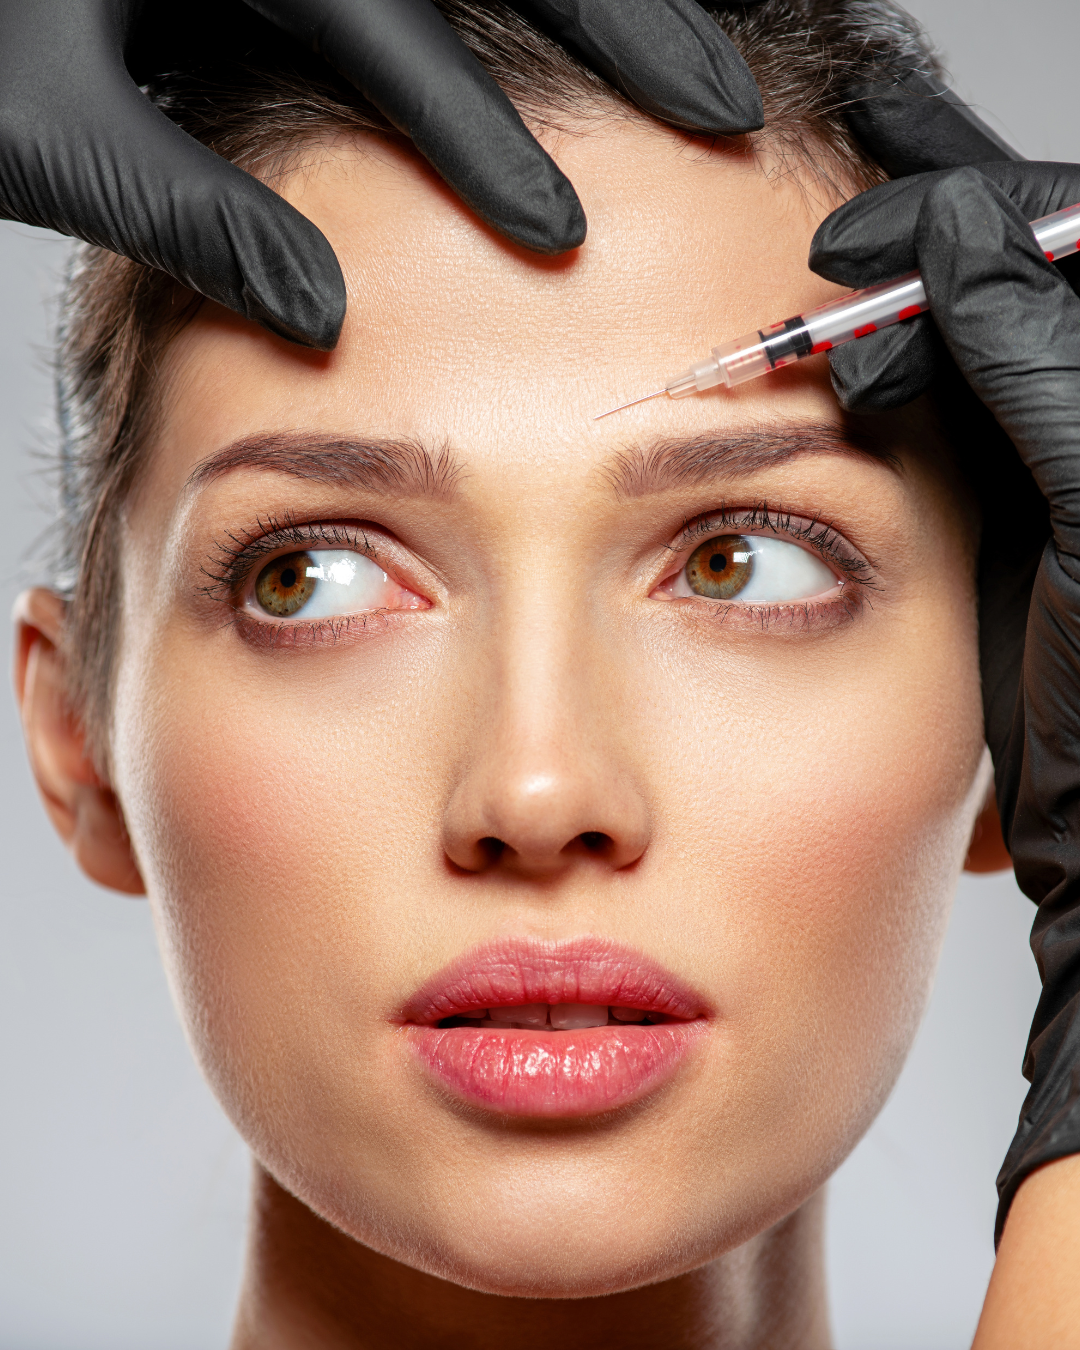 Dermal fillers at The Prager Clinic for facial rejuvenation and anti-ageing.